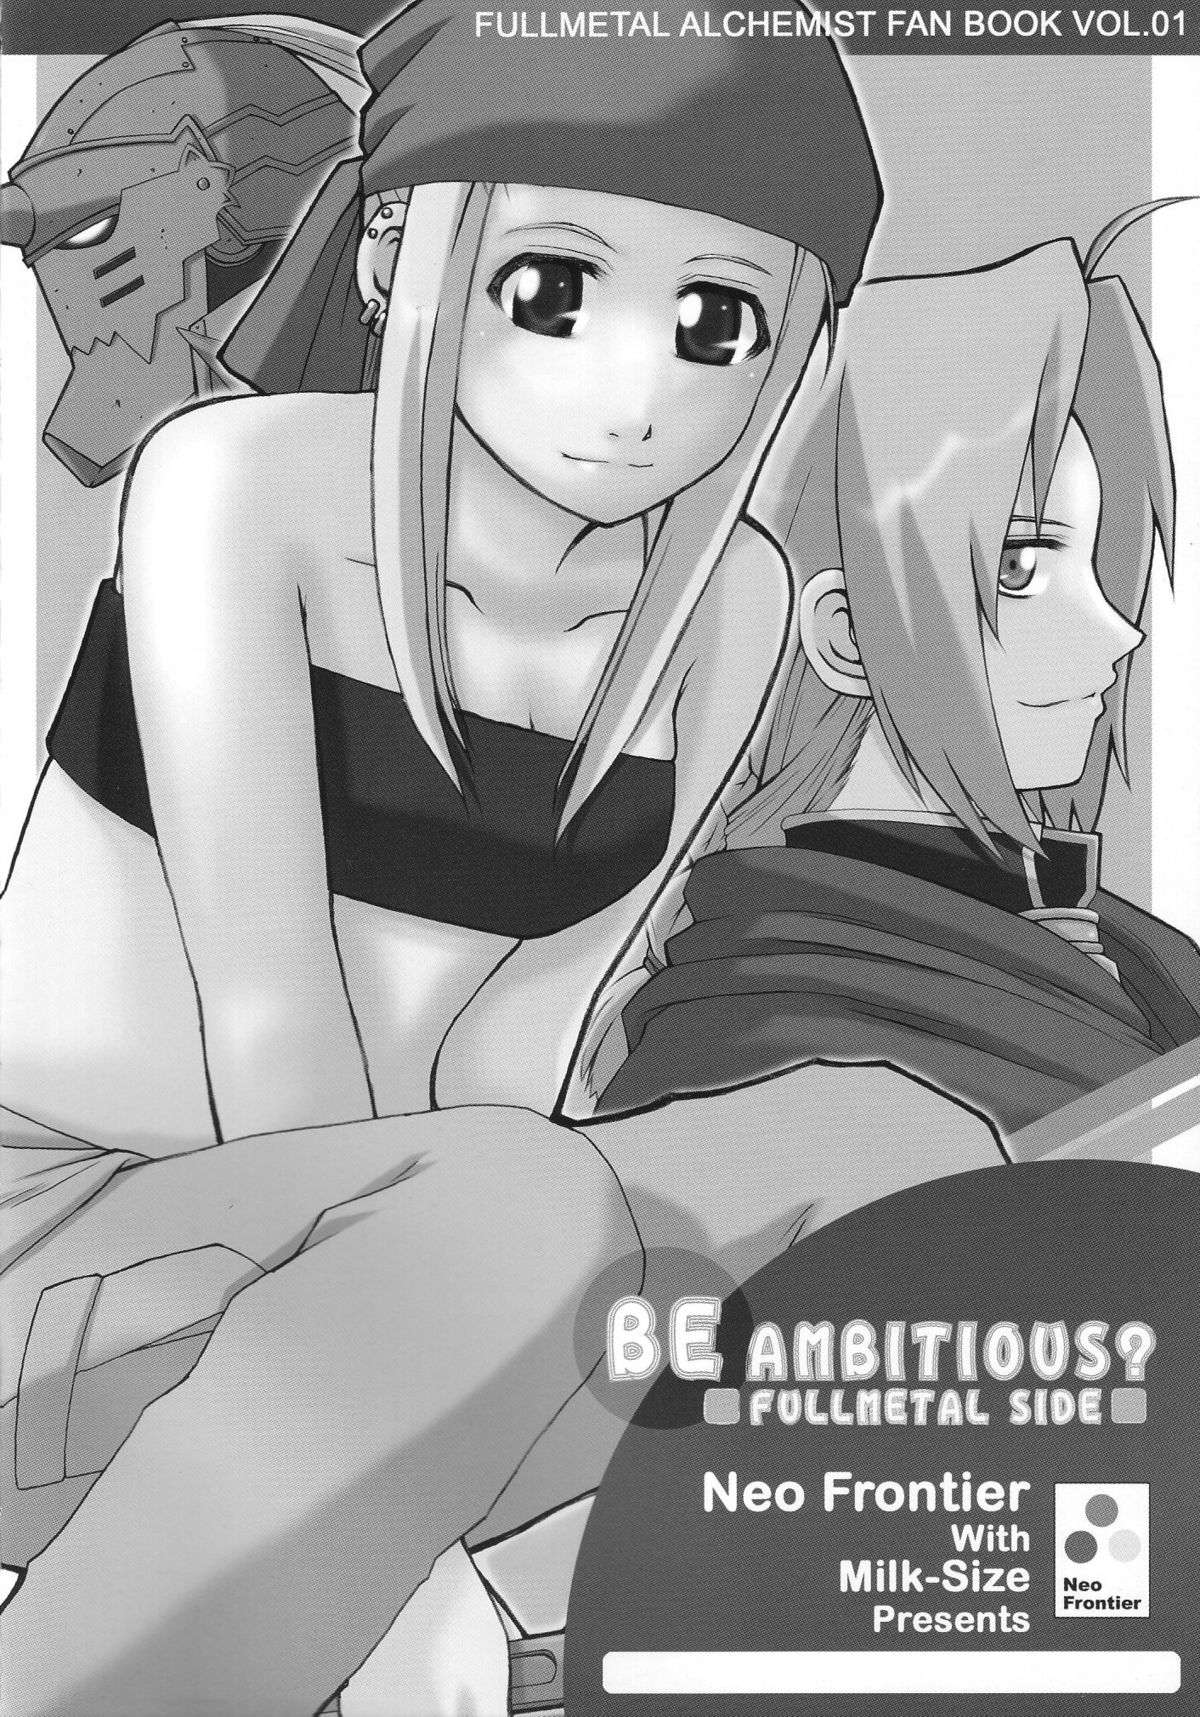 [Neo Frontier with MILK-SIZE] Be Ambitious (Full Metal Alchemist) page 2 full